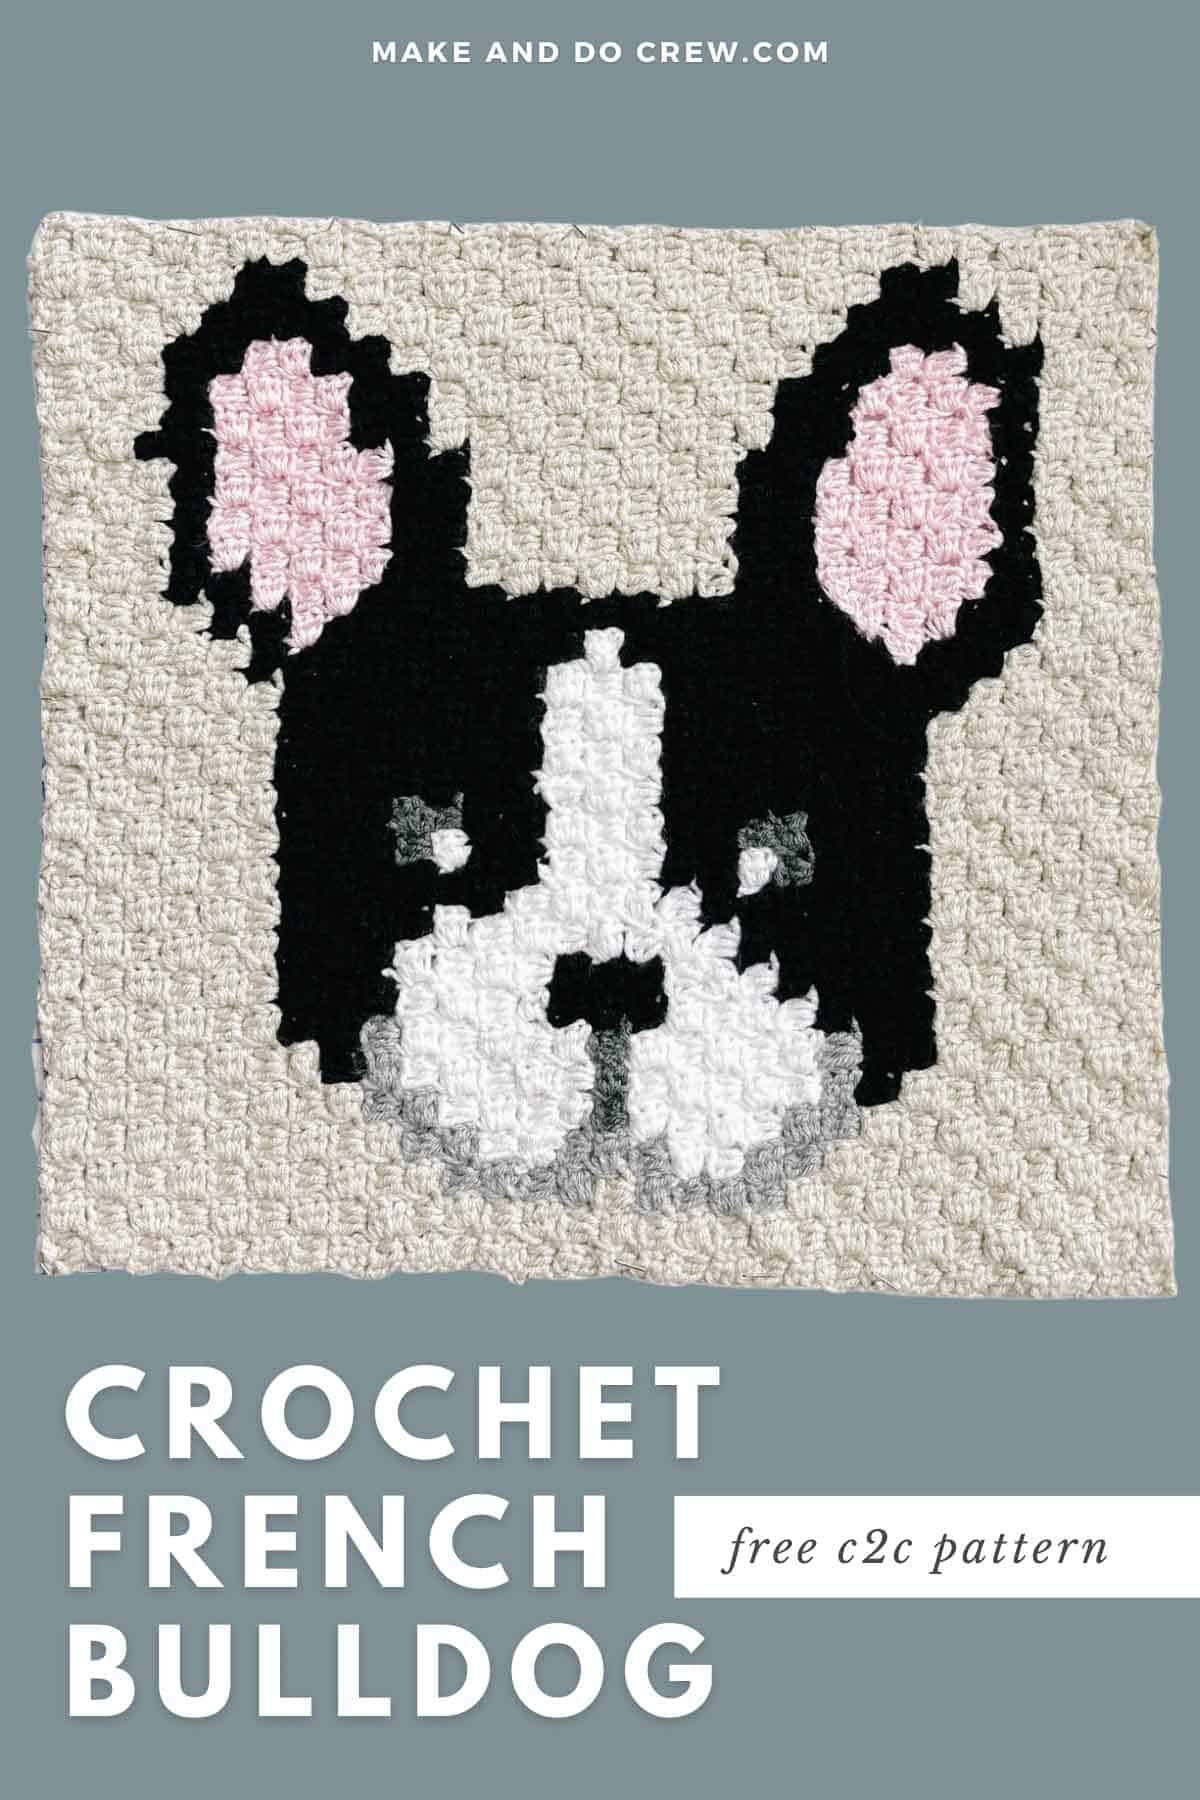 This image shows a corner to corner crochet square of a french bulldog or boston terrier face.